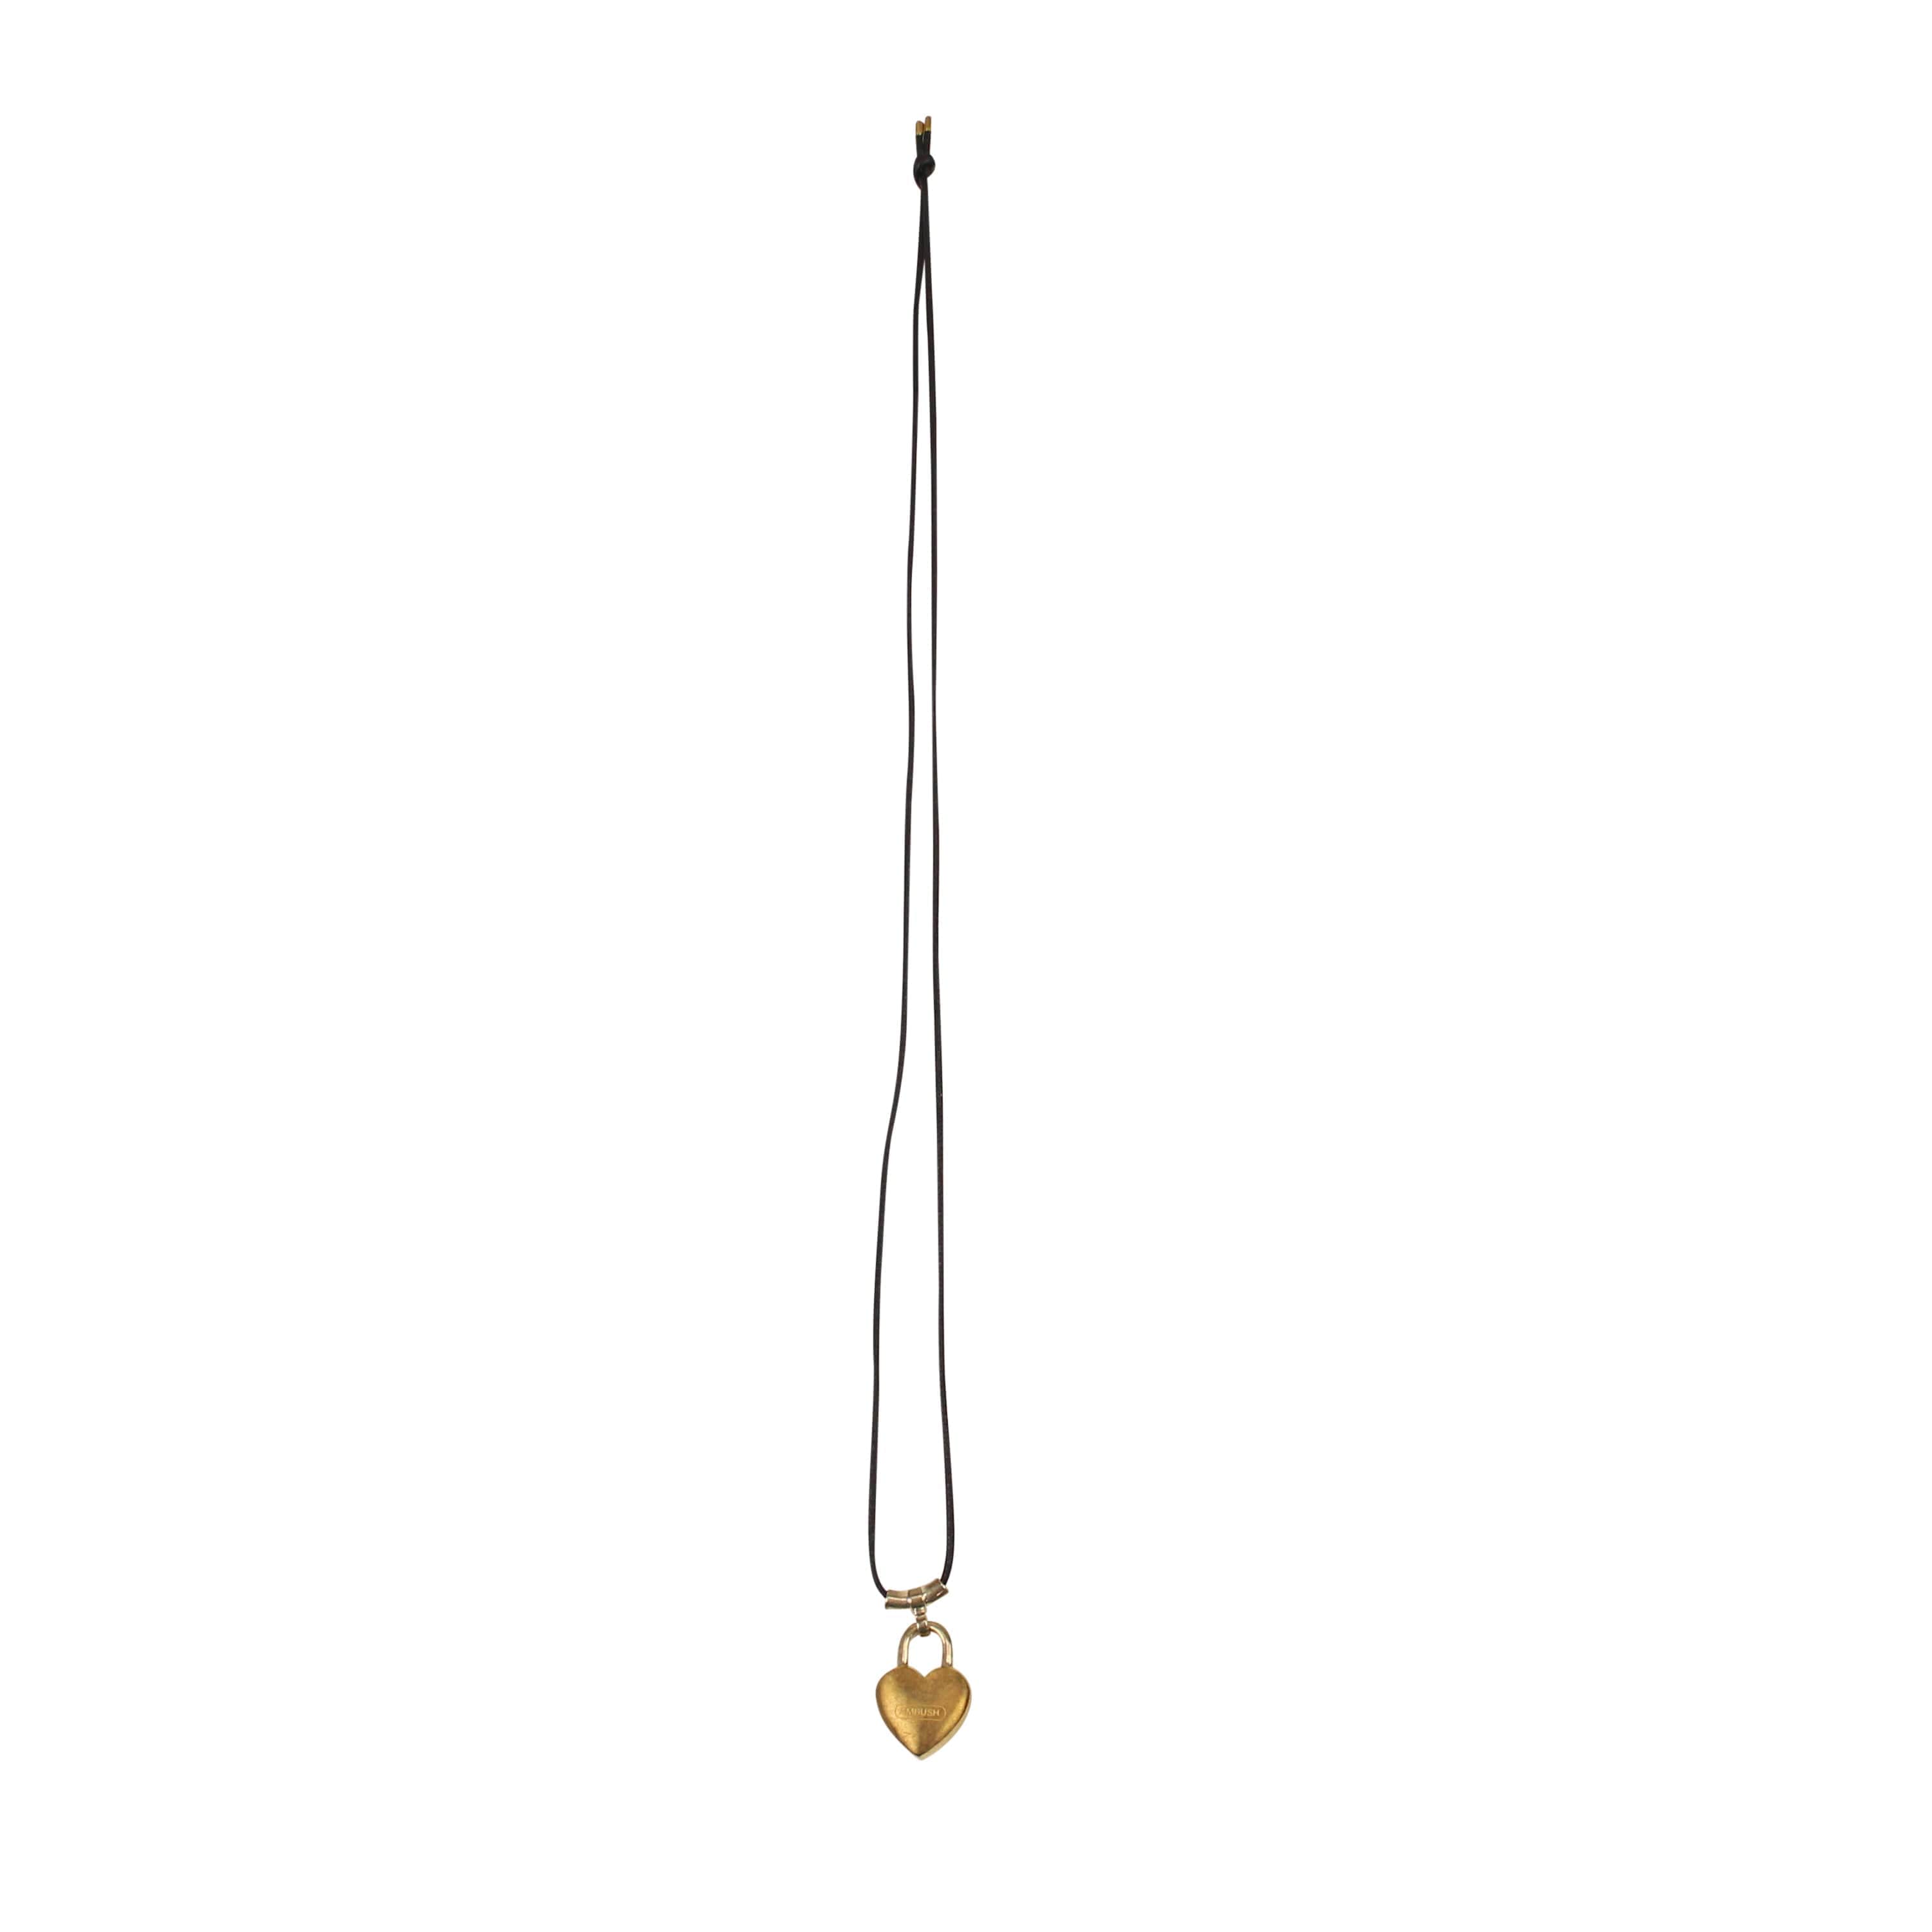 Ambush ambush, channelenable-all, chicmi, couponcollection, main-accessories, shop375, Stadium Goods, under-250, womens-necklaces OS Gold S Heart Padlock Necklace 95-AMB-3054/OS 95-AMB-3054/OS